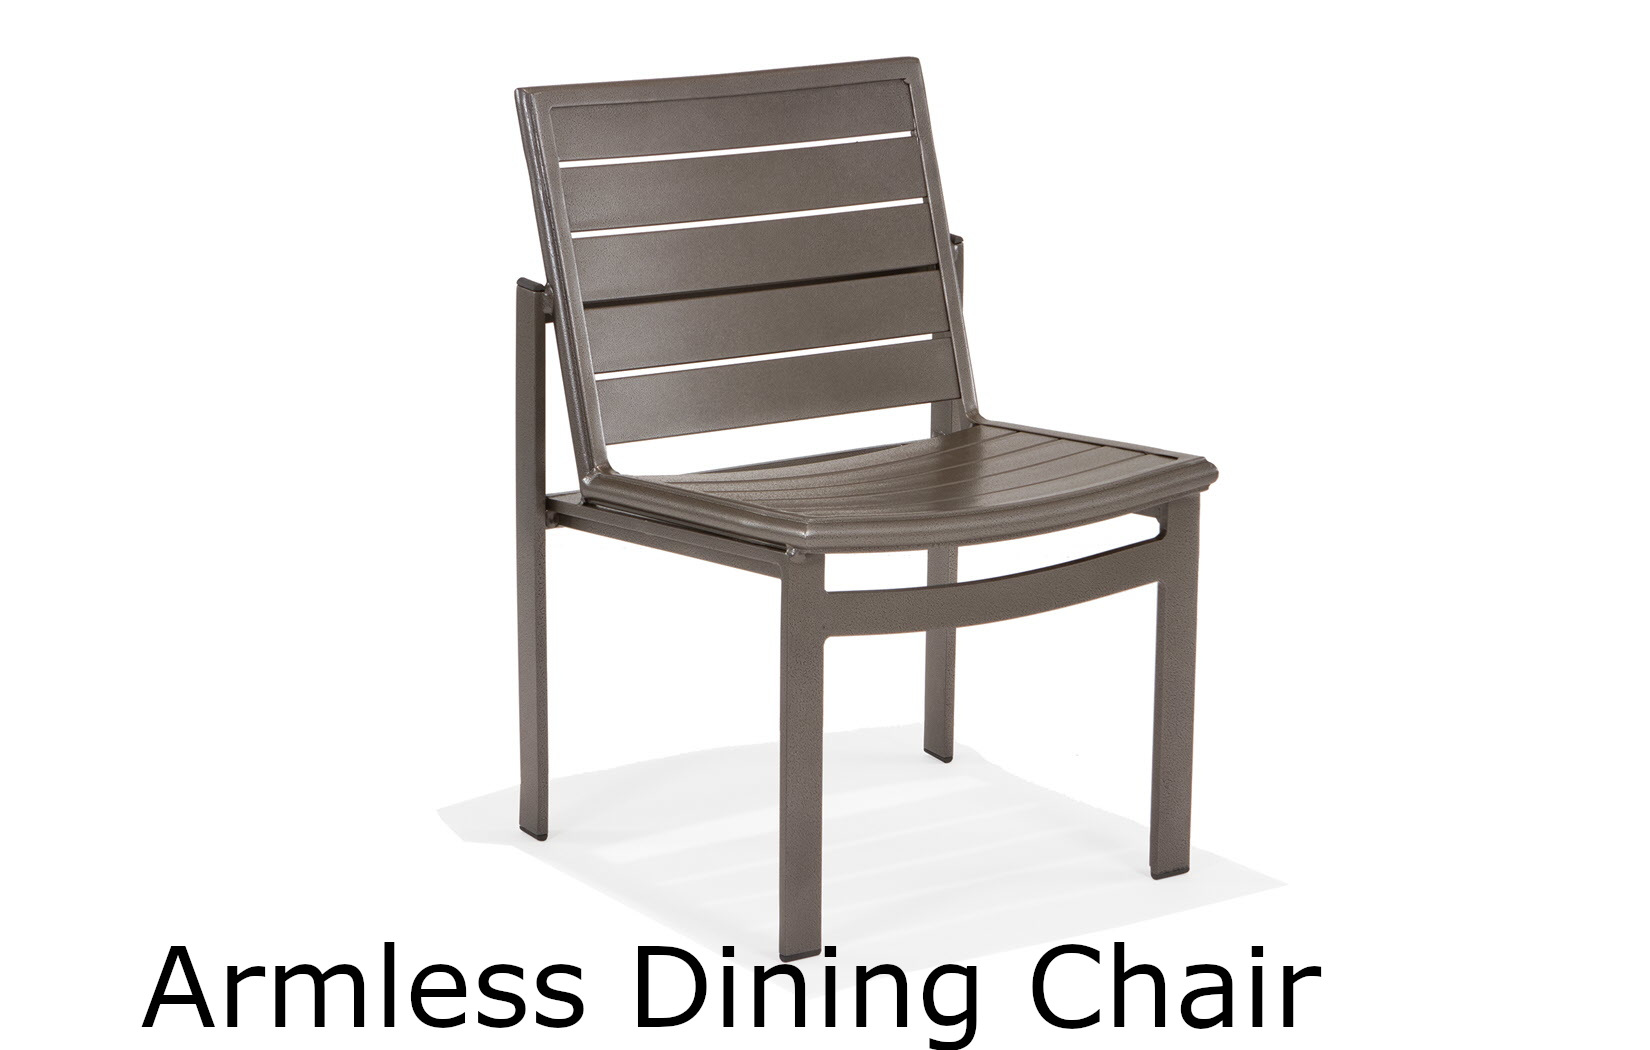 Meza Slat Collection Armless Dining Chair